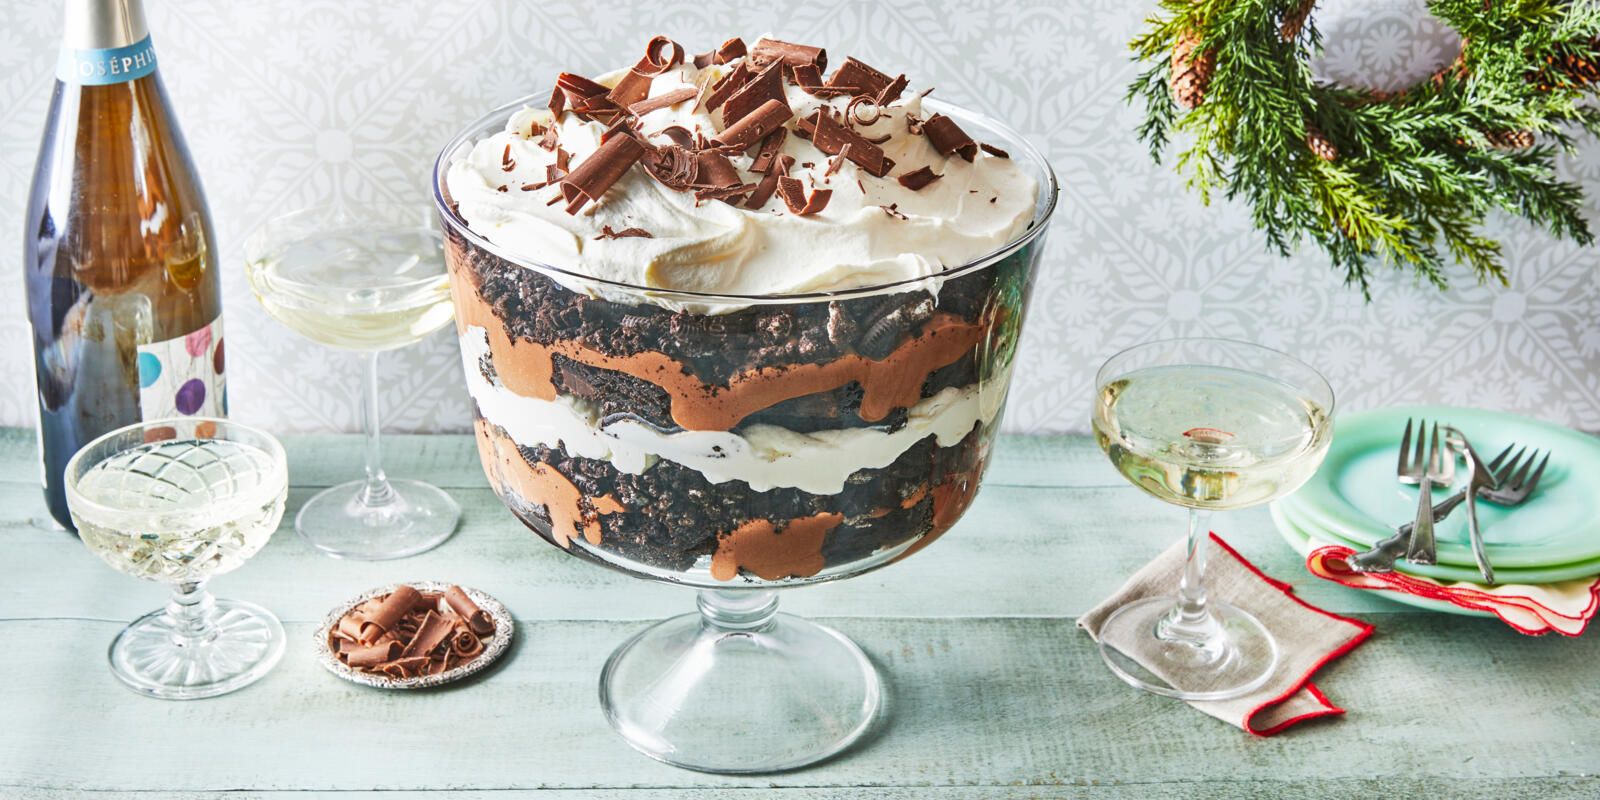 Recipes - Kahlua, Espresso and Chocolate Trifle with Candied Peanuts